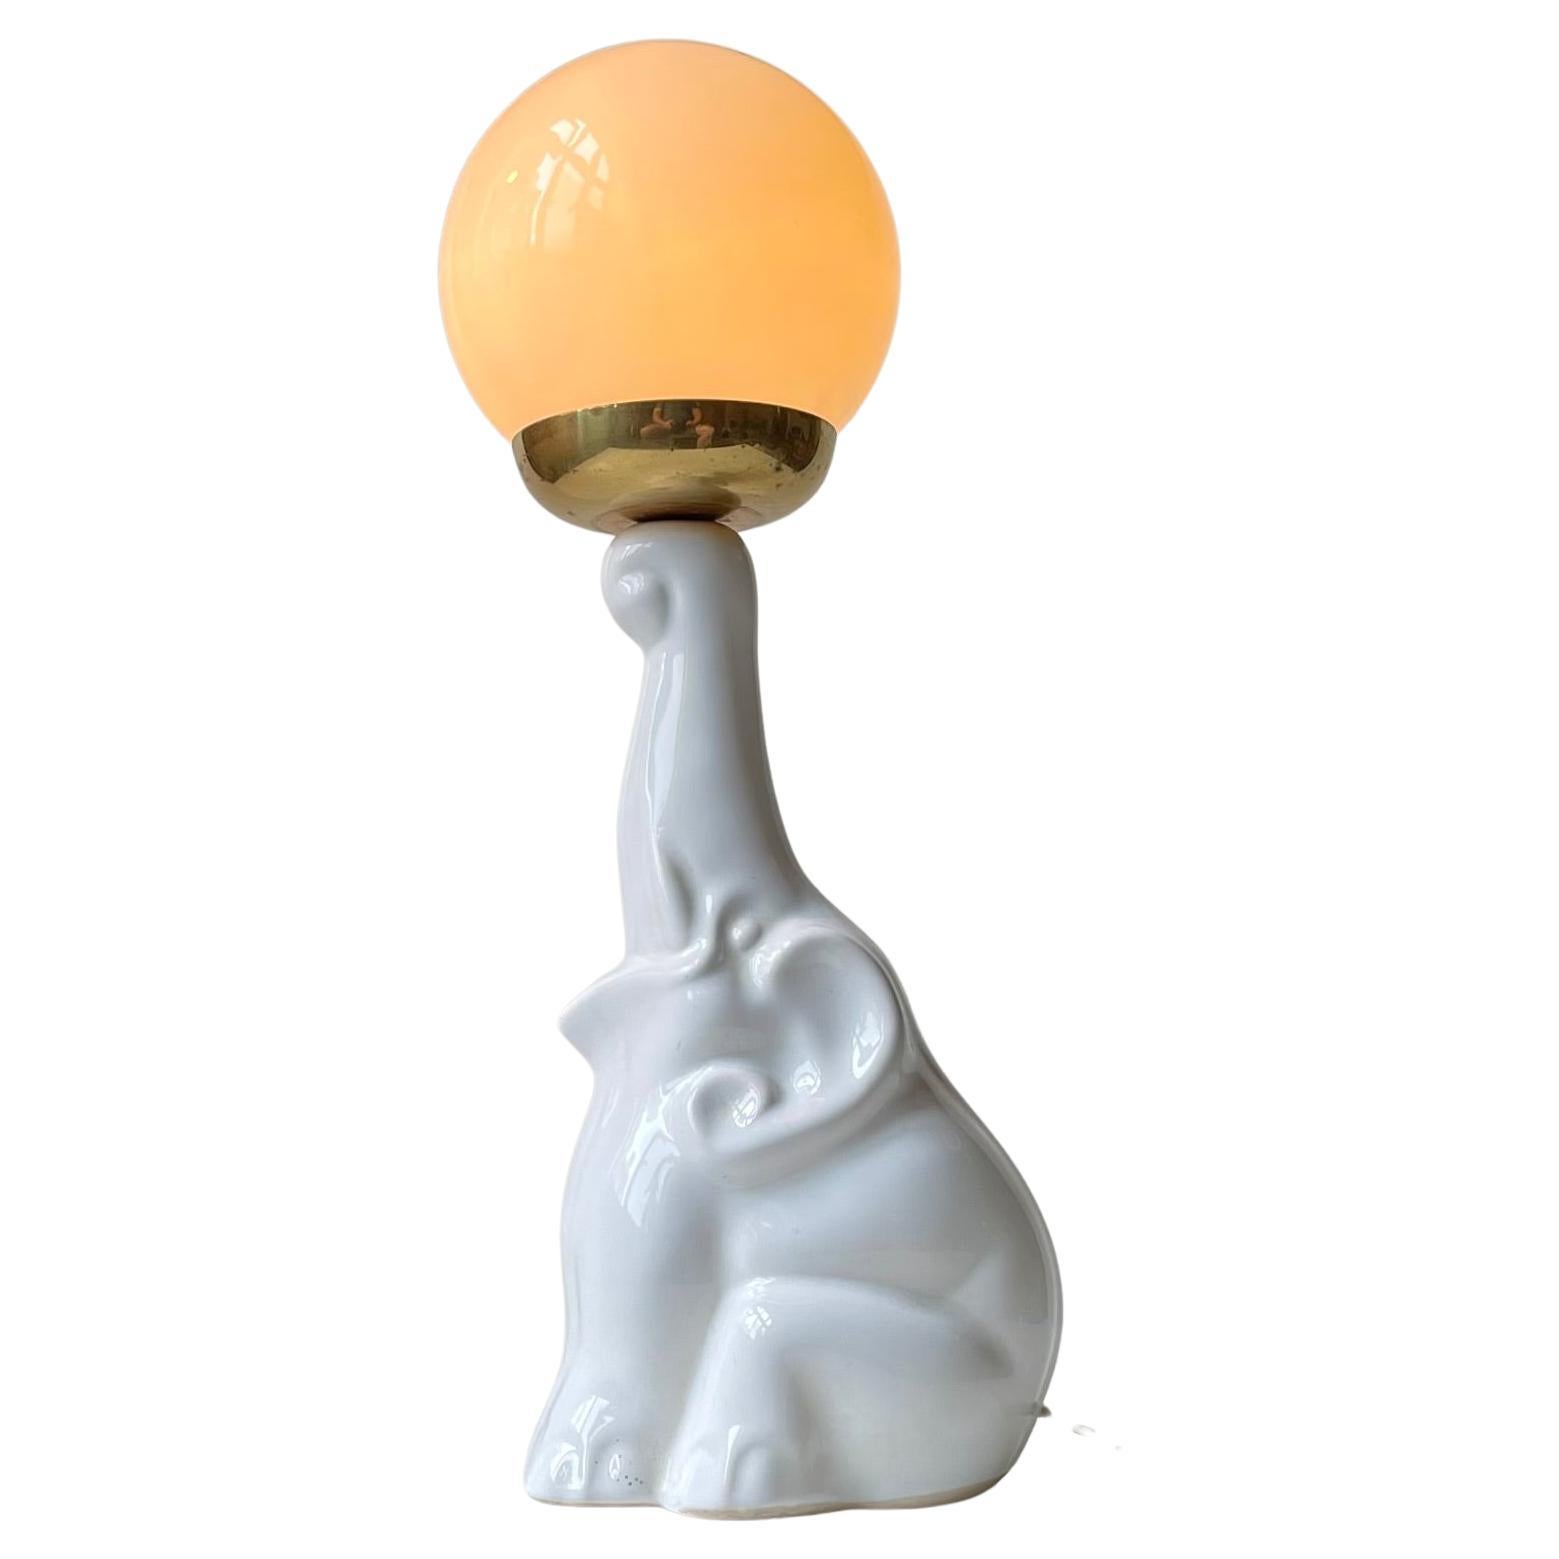 Vintage Baby Elephant Table Lamp in White Porcelain, 1970s